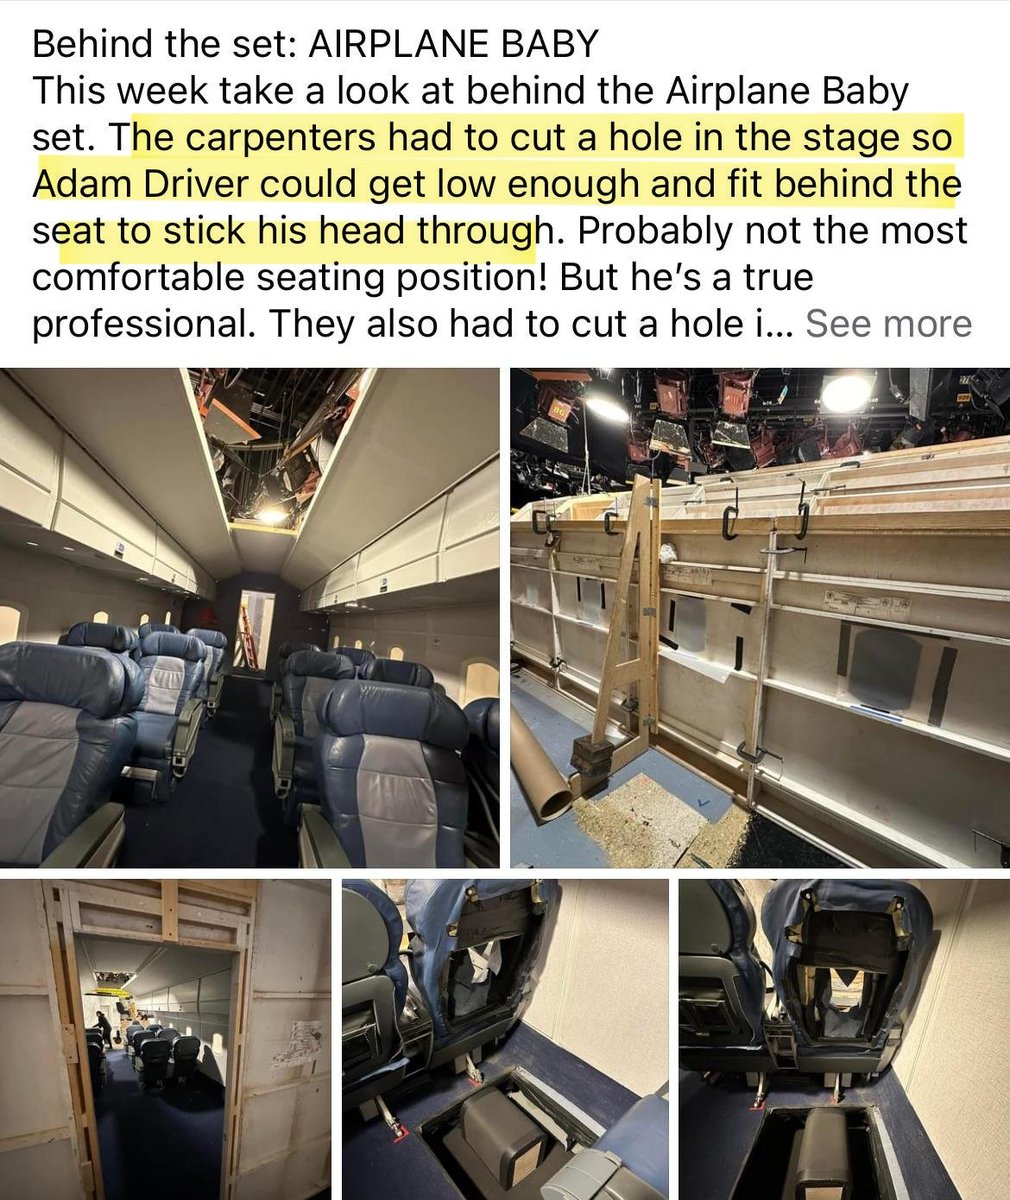 SNL had to cut a hole in the stage so Adam Driver could get low enough for the Airplane Baby sketch. 😮 
#AdamDriver 
Via LivefromNewYork Reddit